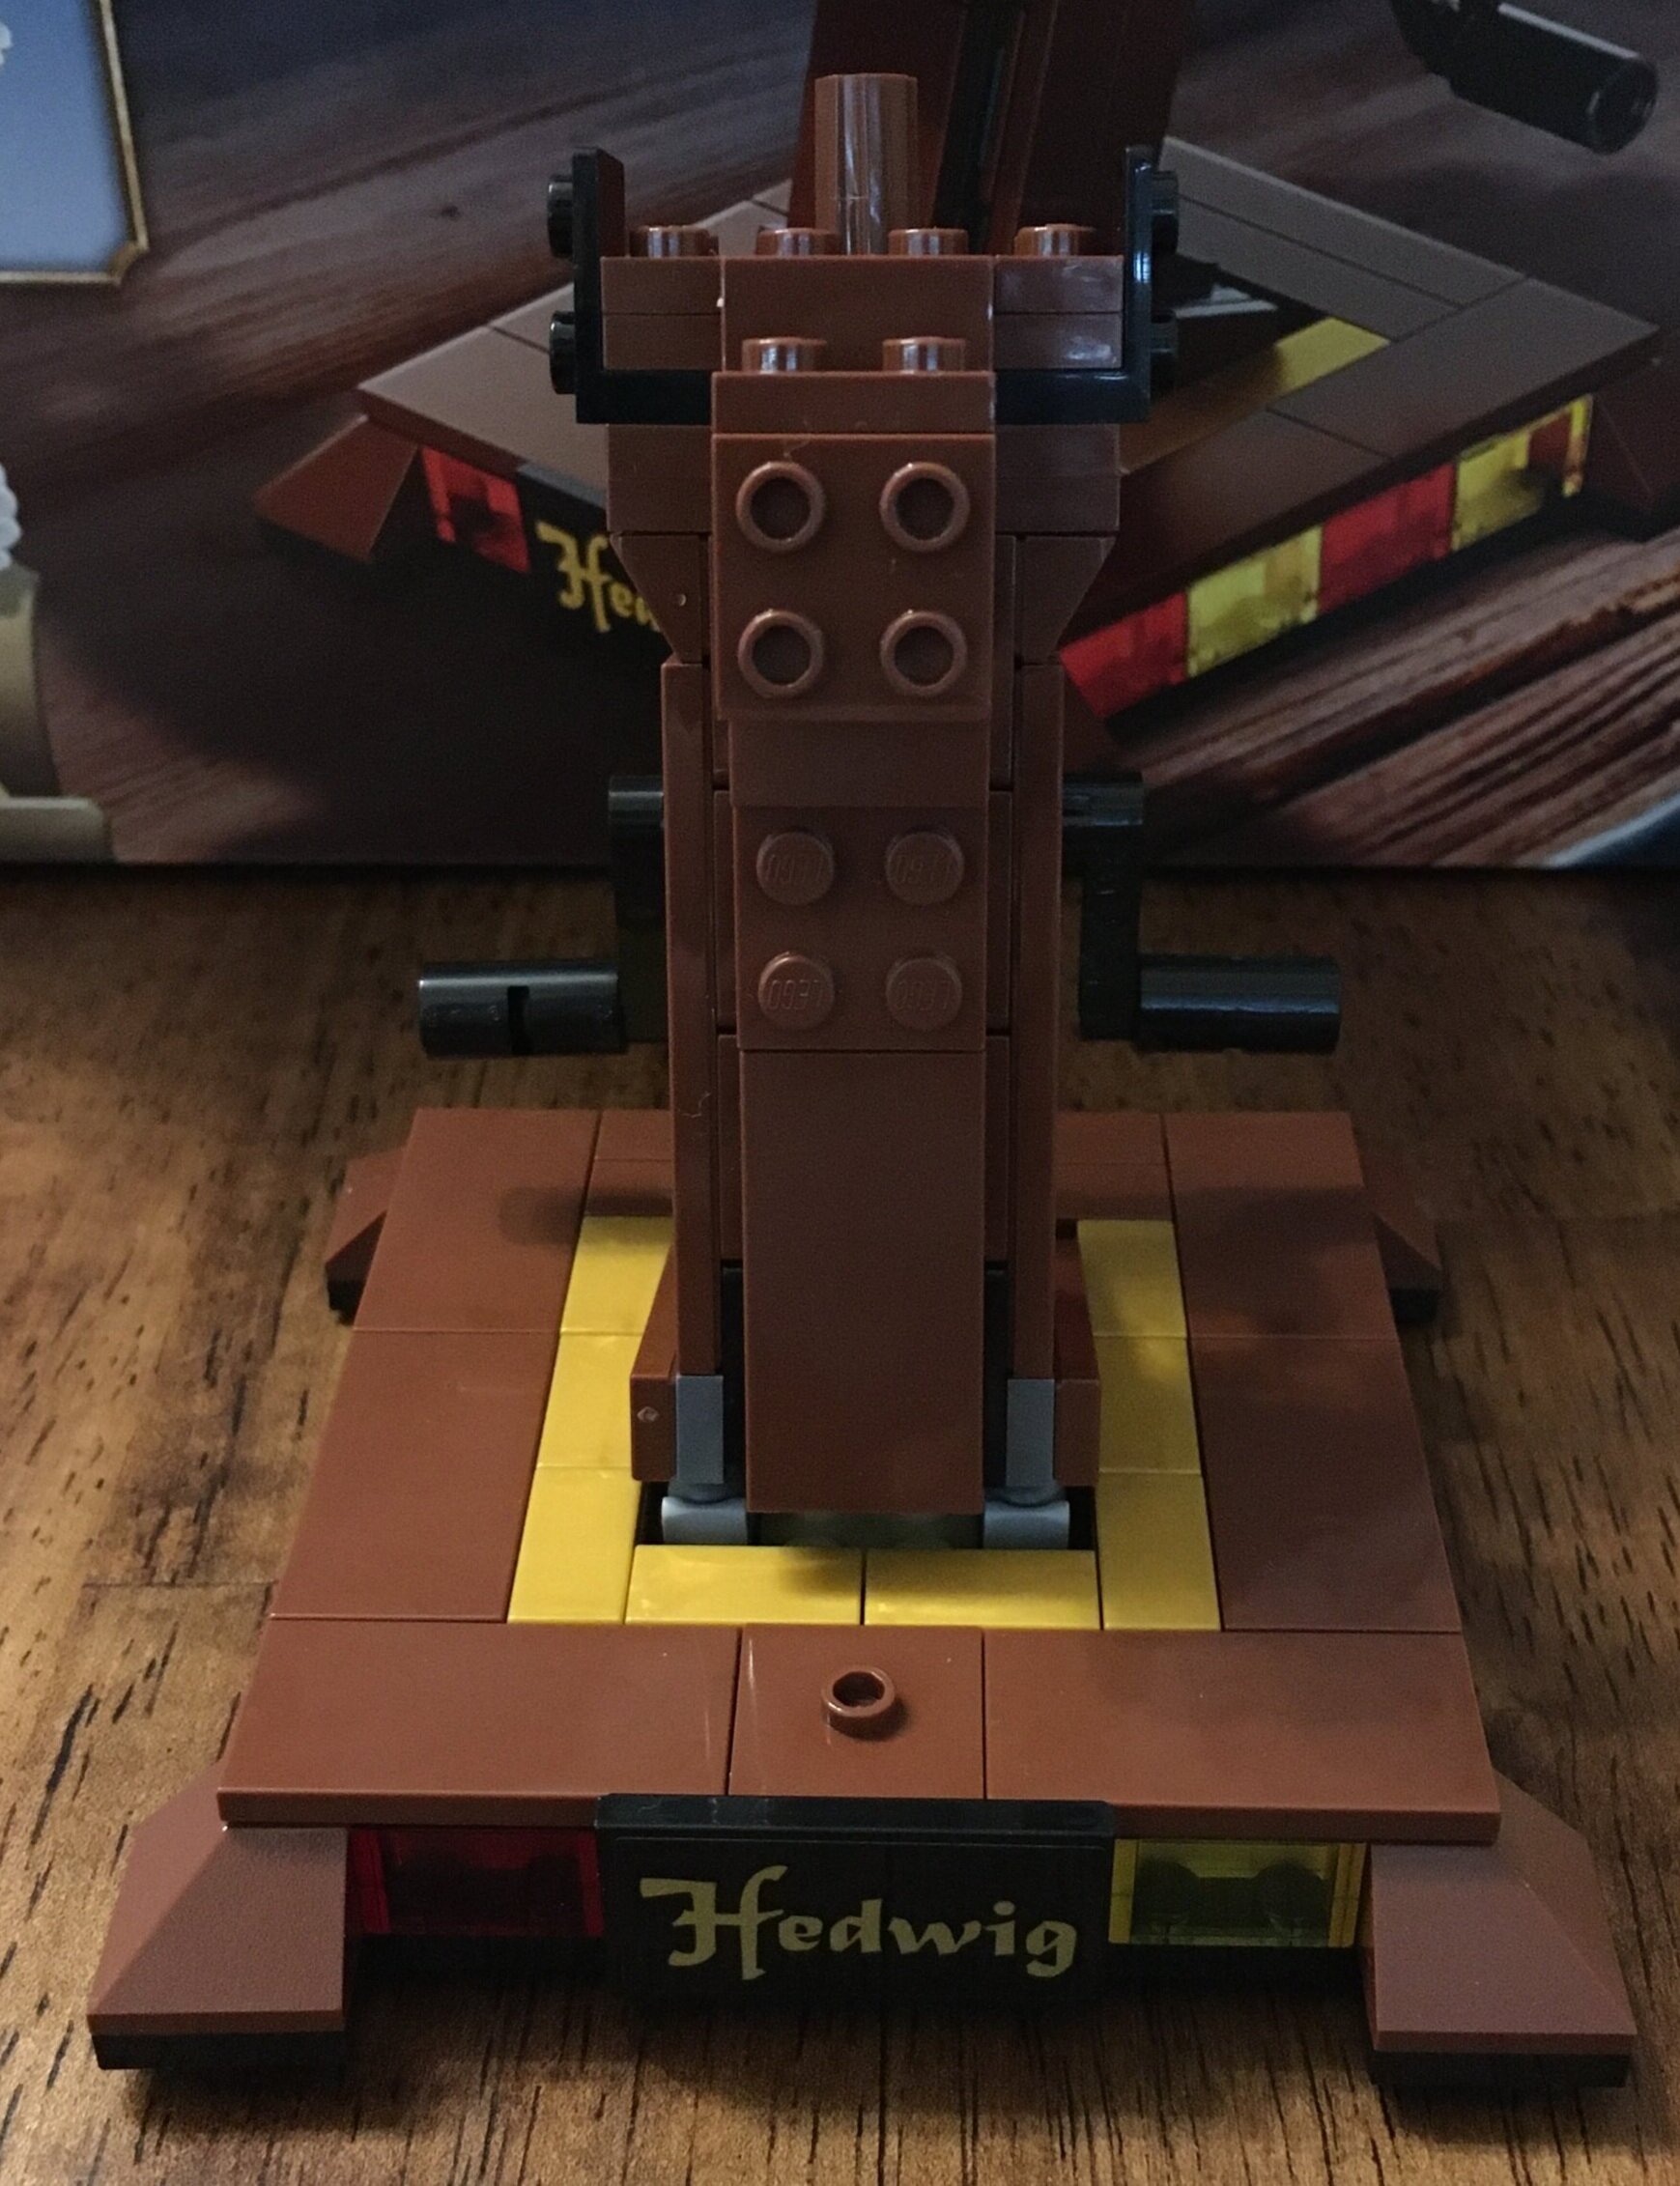 Review: LEGO 75979 Hedwig - Jay's Brick Blog